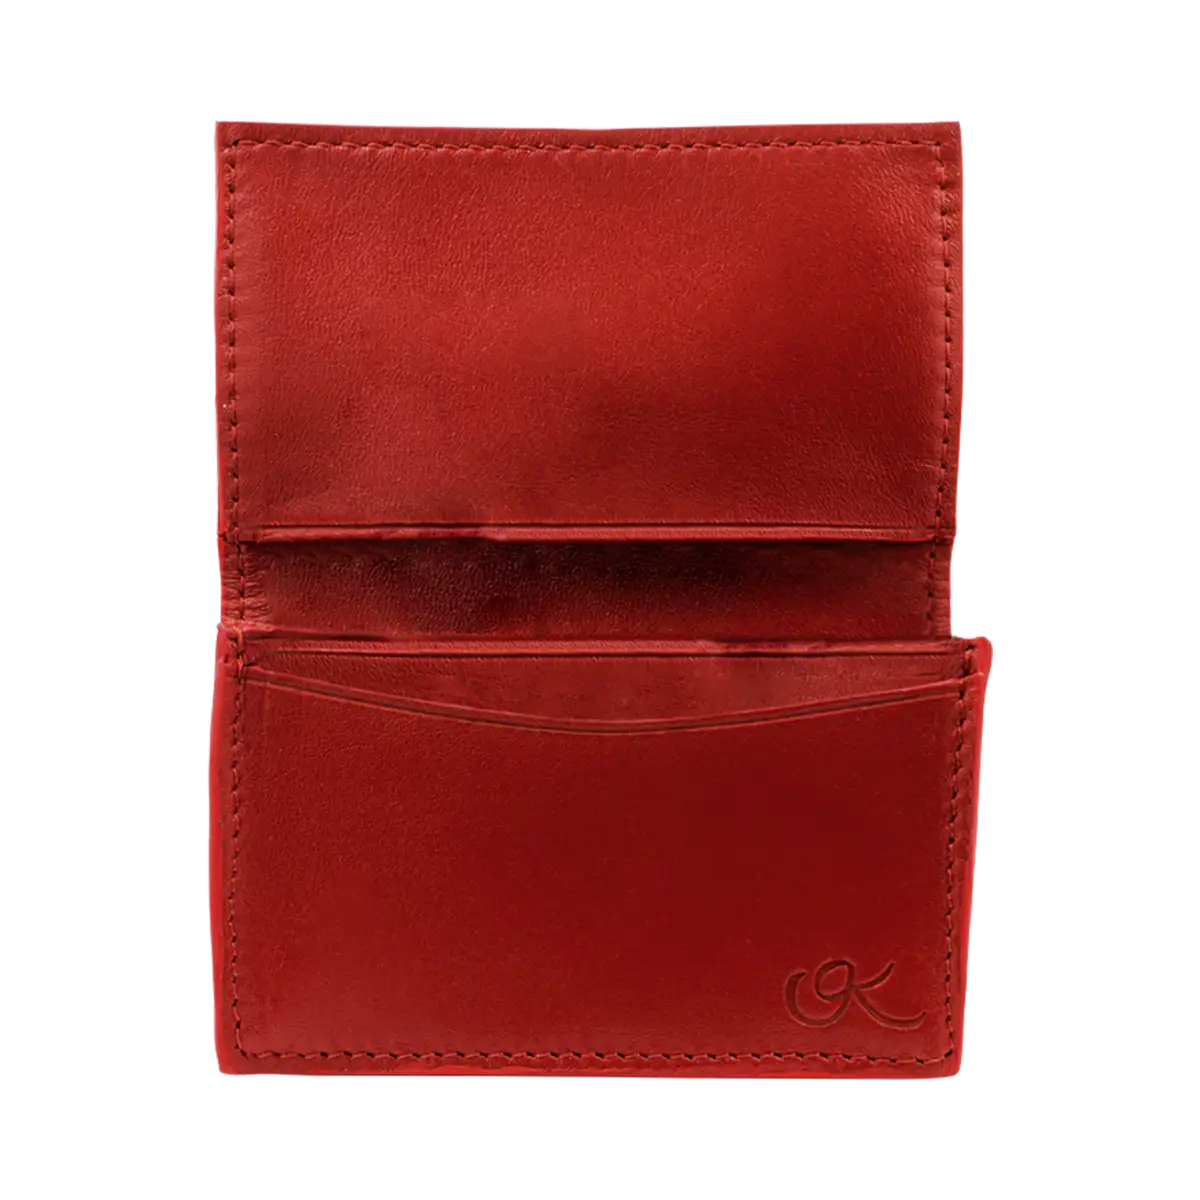 small red leather crocodile print cardholder. Accessory for men and women. Shop in San Diego, CA.